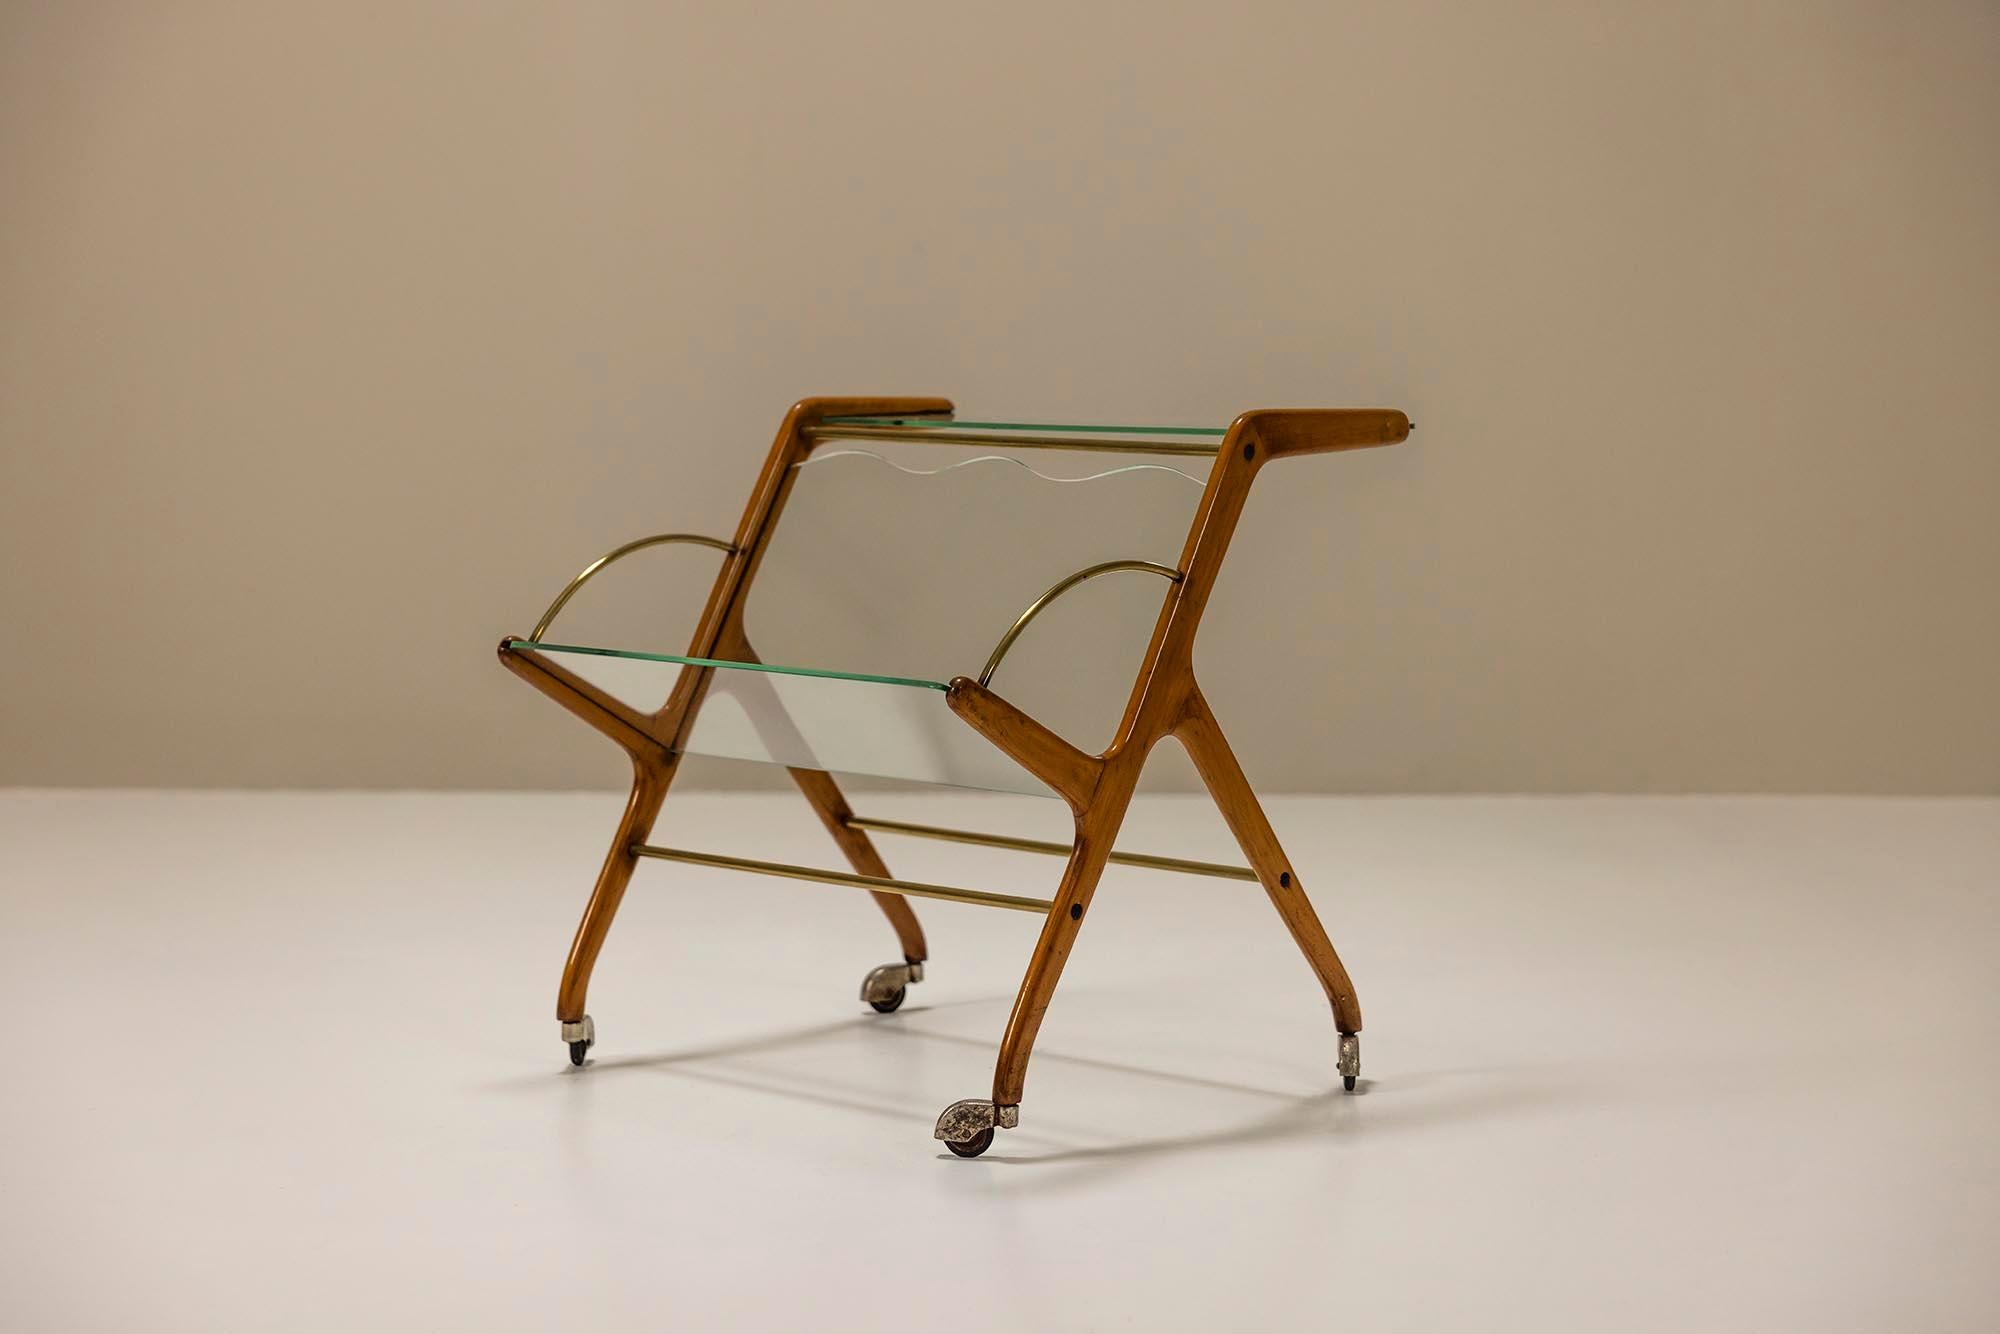 This trolley is made of cherry wood and is strongly reminiscent of Ico Parisi in style and design.

Design

The highly stylized frame is made in a traditional manner and we see the tooth connections on the upper glass holders and a pin-in-hole